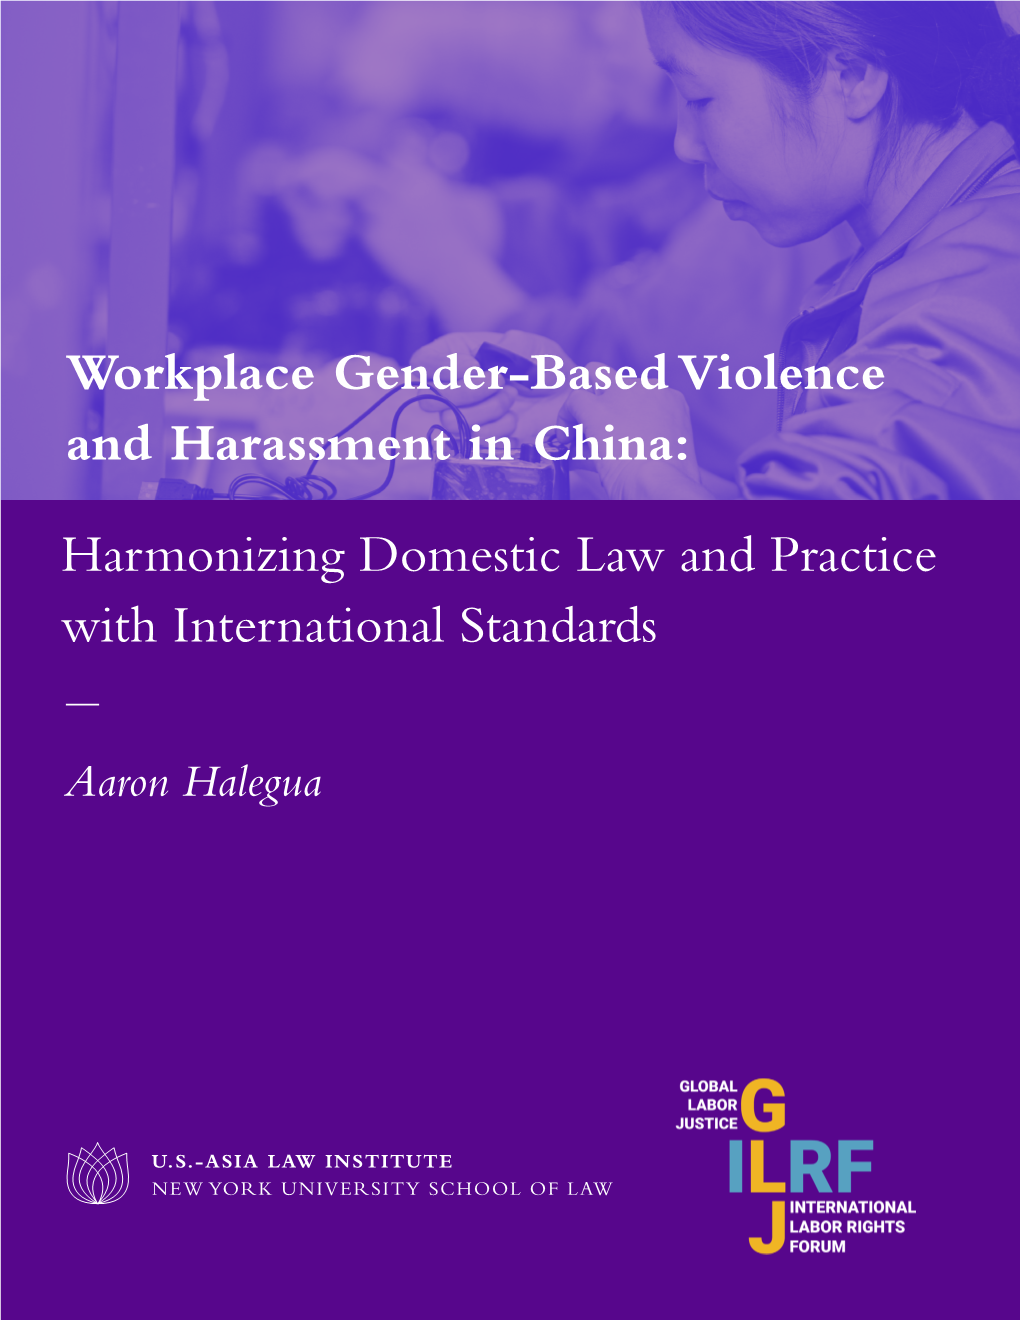 Workplace Gender-Based Violence and Harassment in China